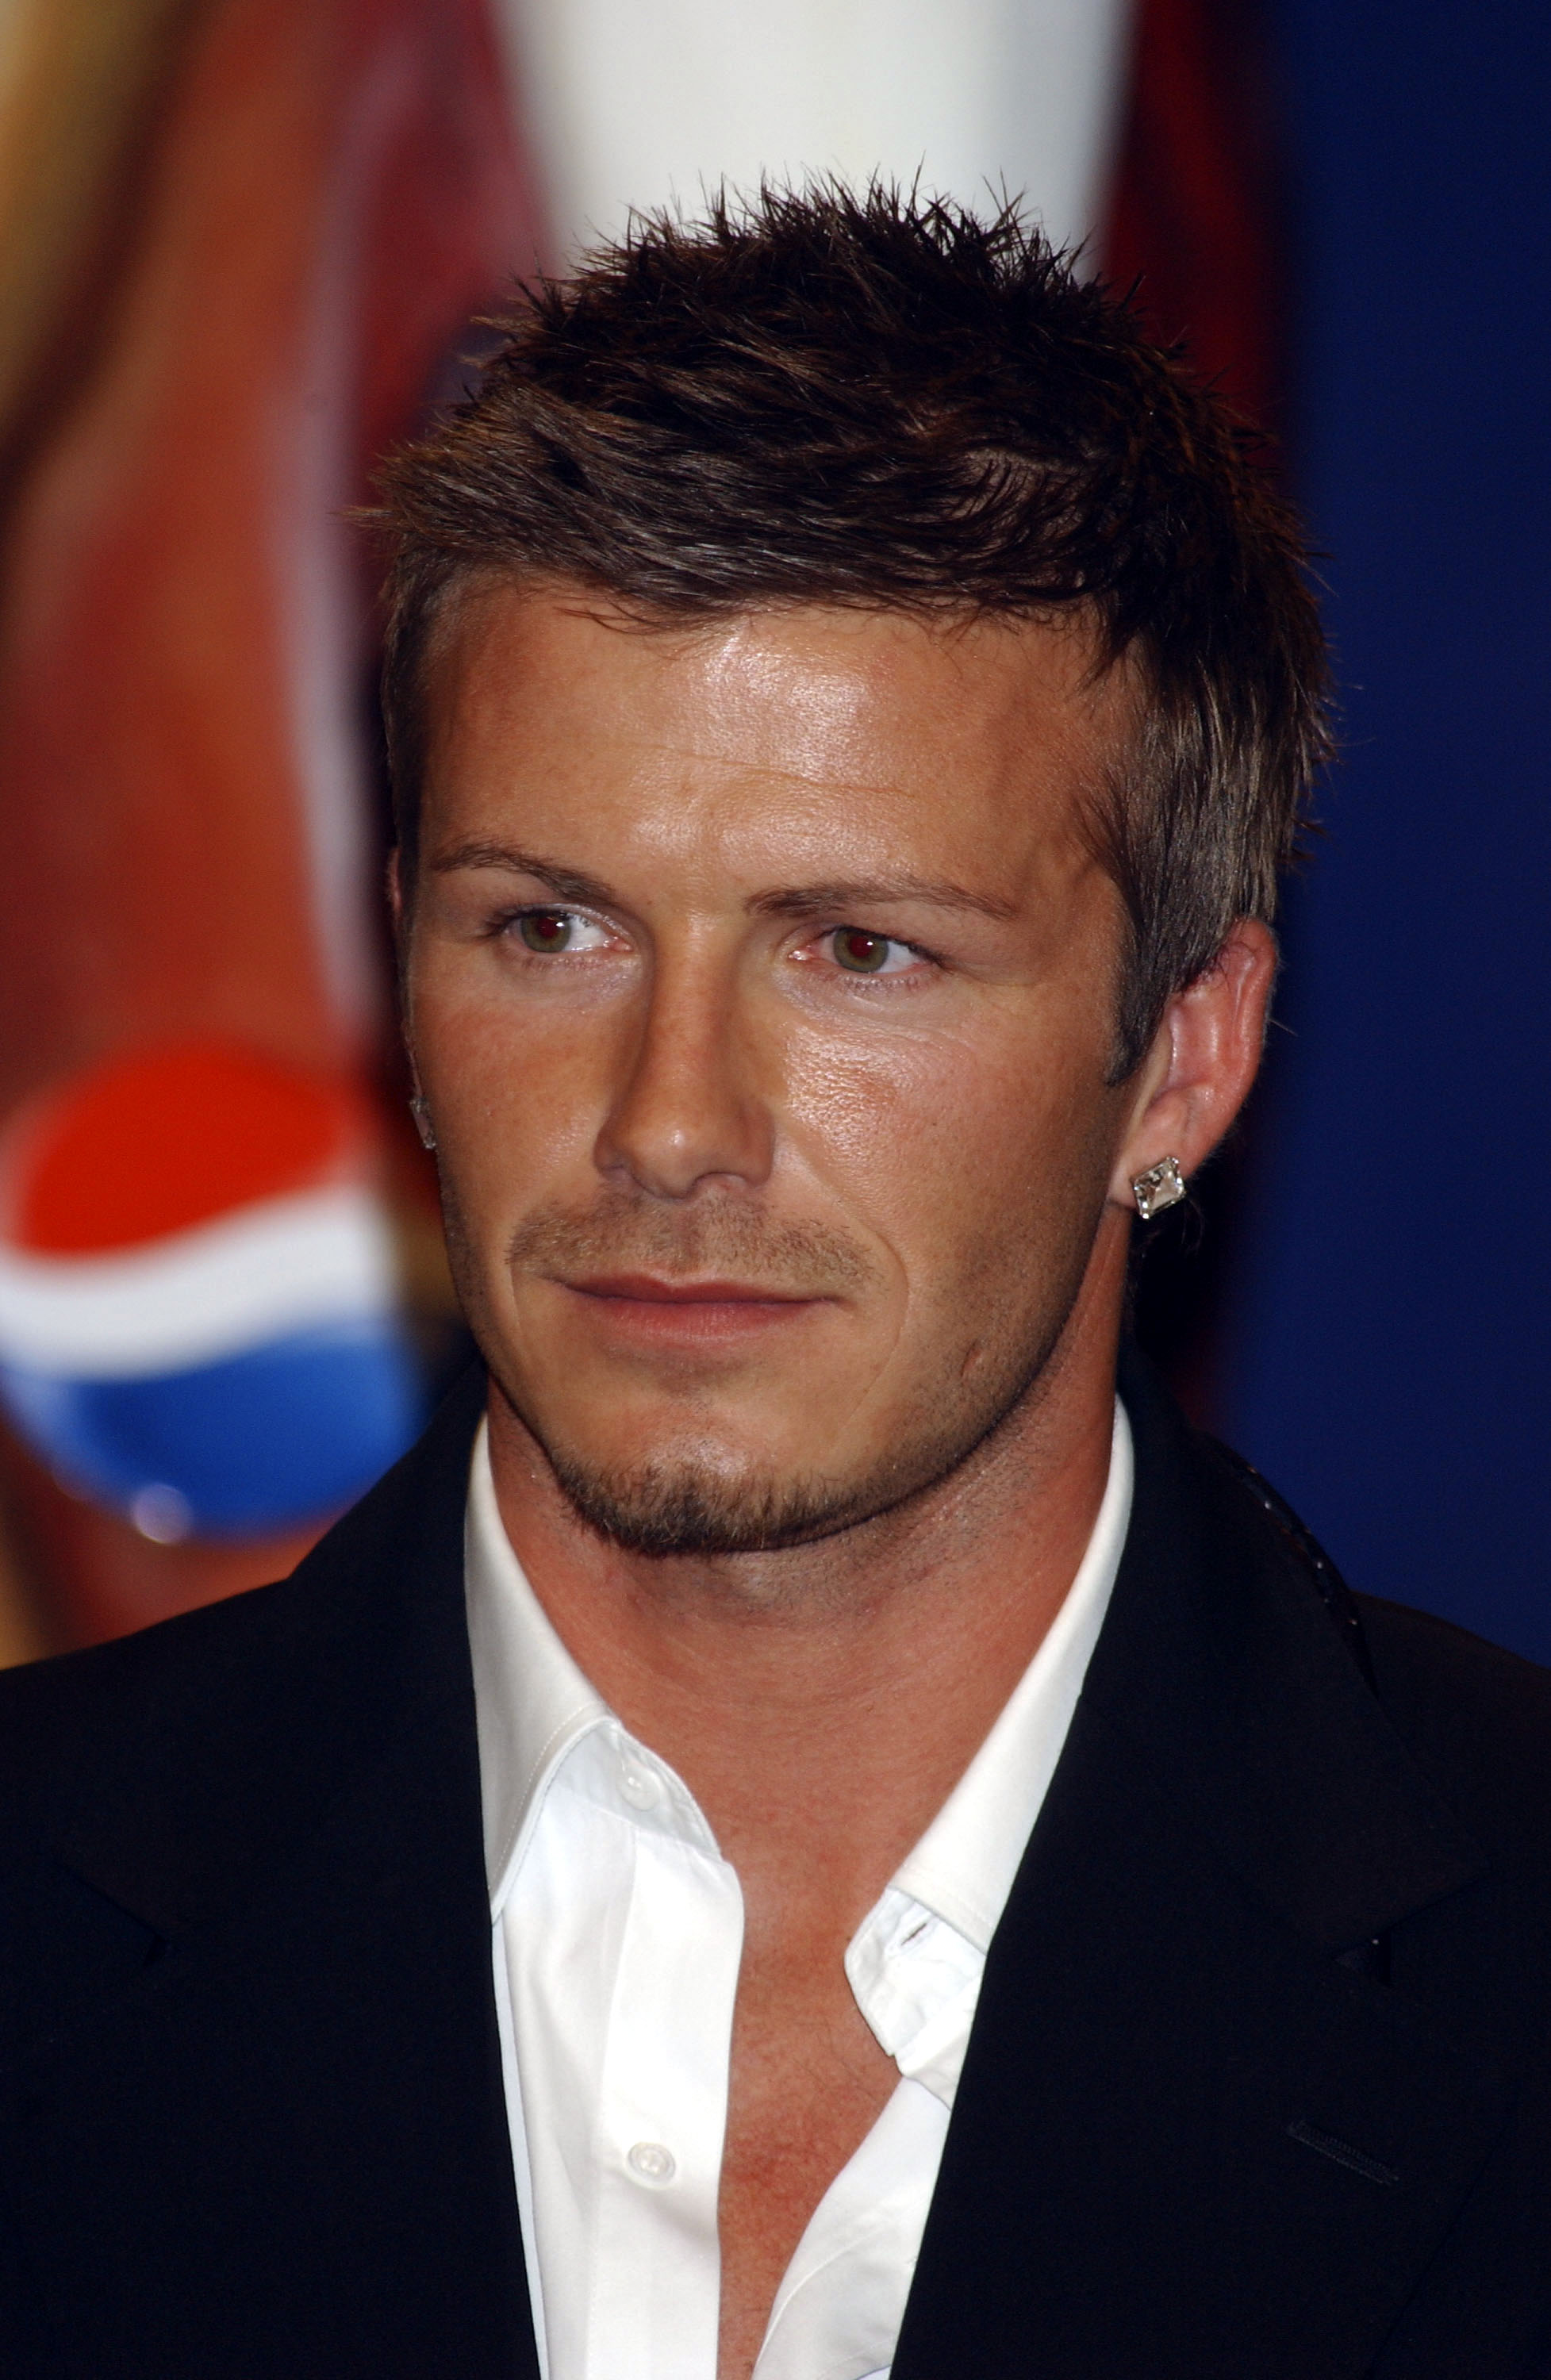 David Beckham at the premiere of his Pepsi commercial in Madrid, Spain on February 23, 2005 | Source: Getty Images